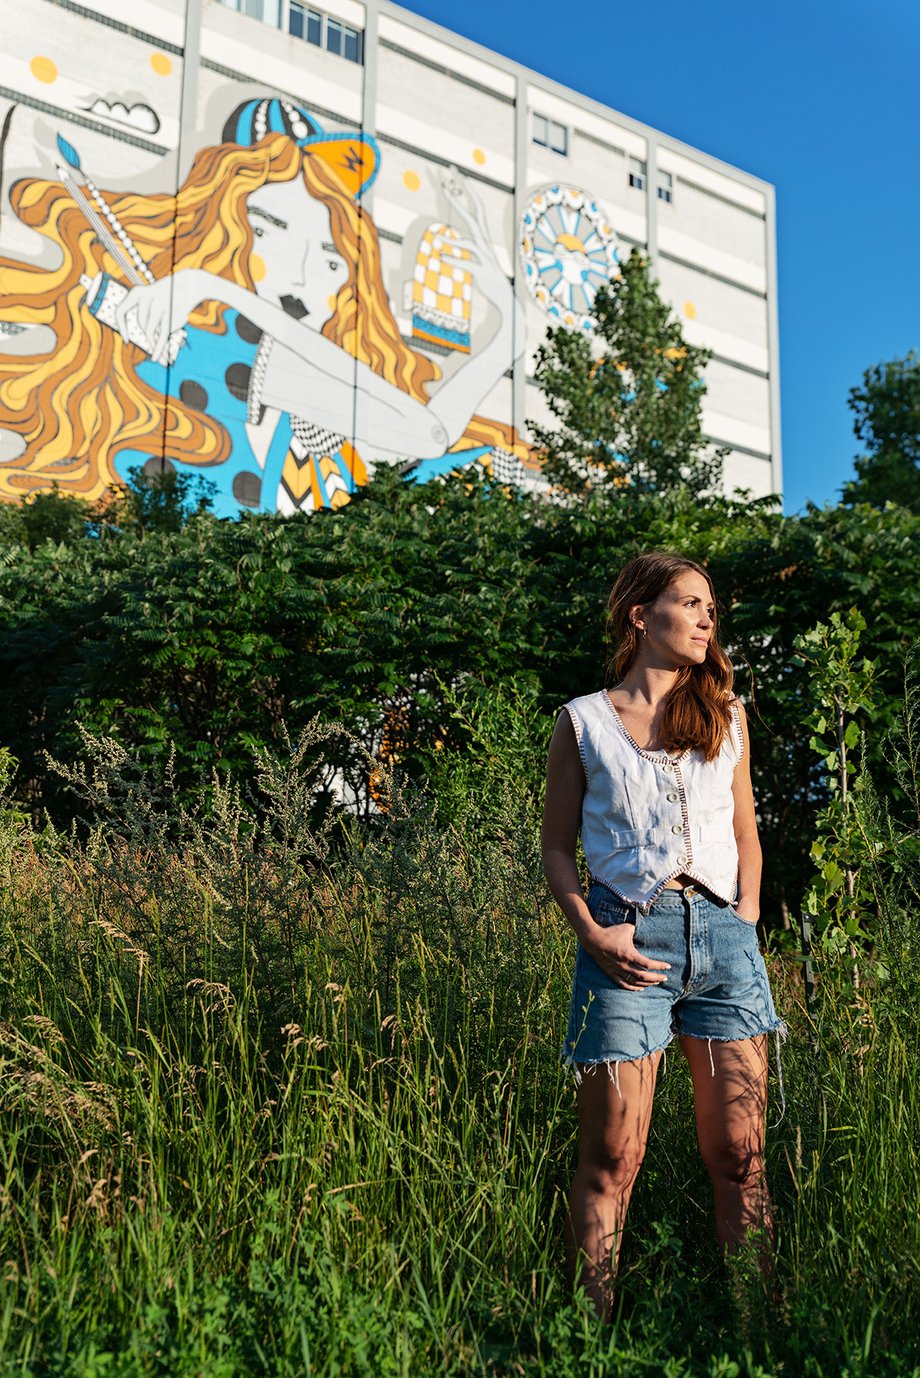 Brittany stands in front of greenery and another mural in Mile End in this photo by David Giral